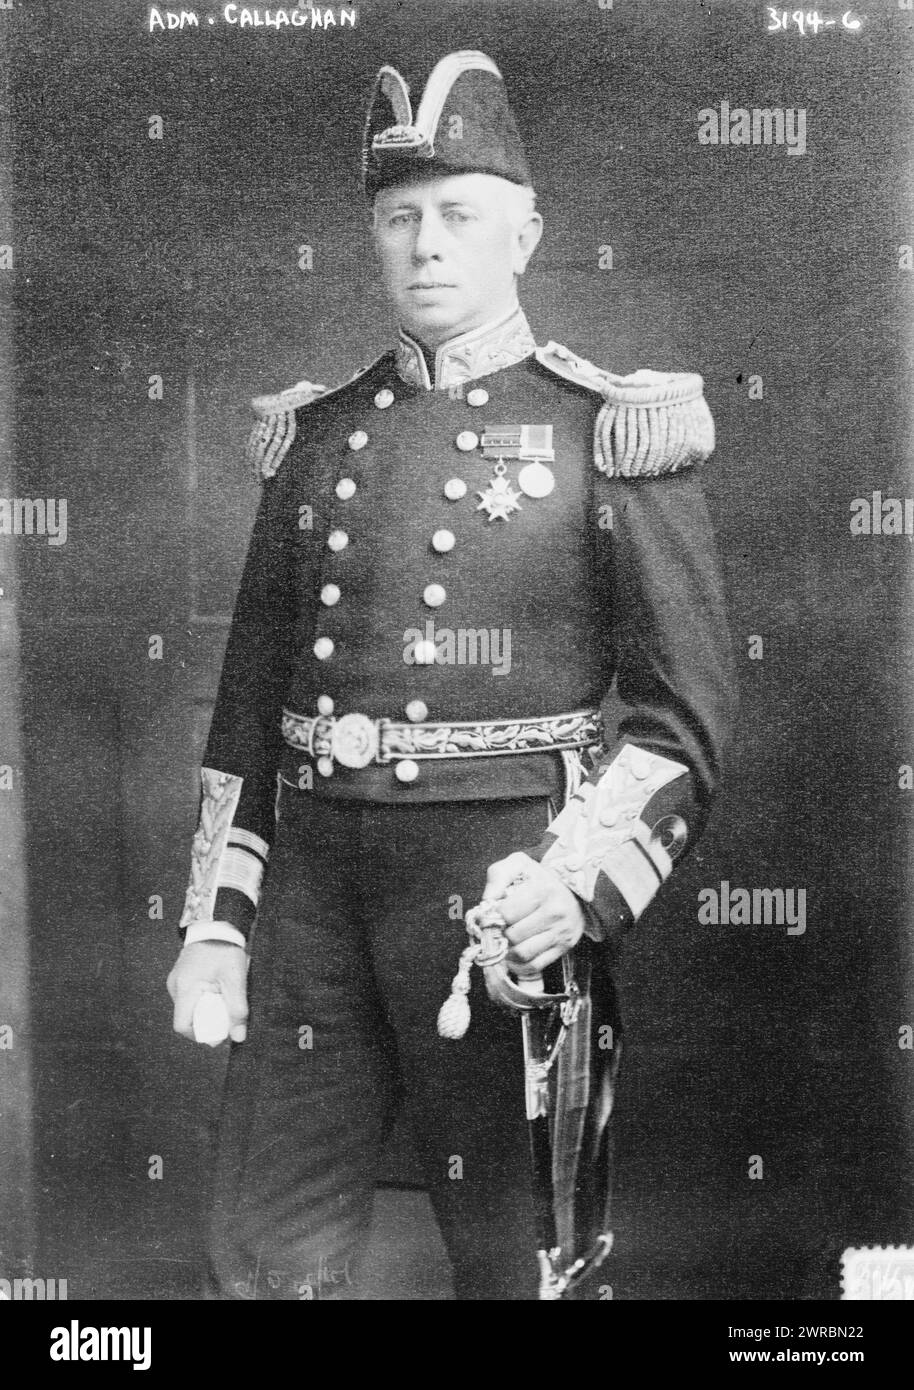 Adm. Callaghan, Photograph shows Sir George Callaghan (1852-1920) who was an officer in the British Royal Navy., 1914 Sept. 24, Glass negatives, 1 negative: glass Stock Photo